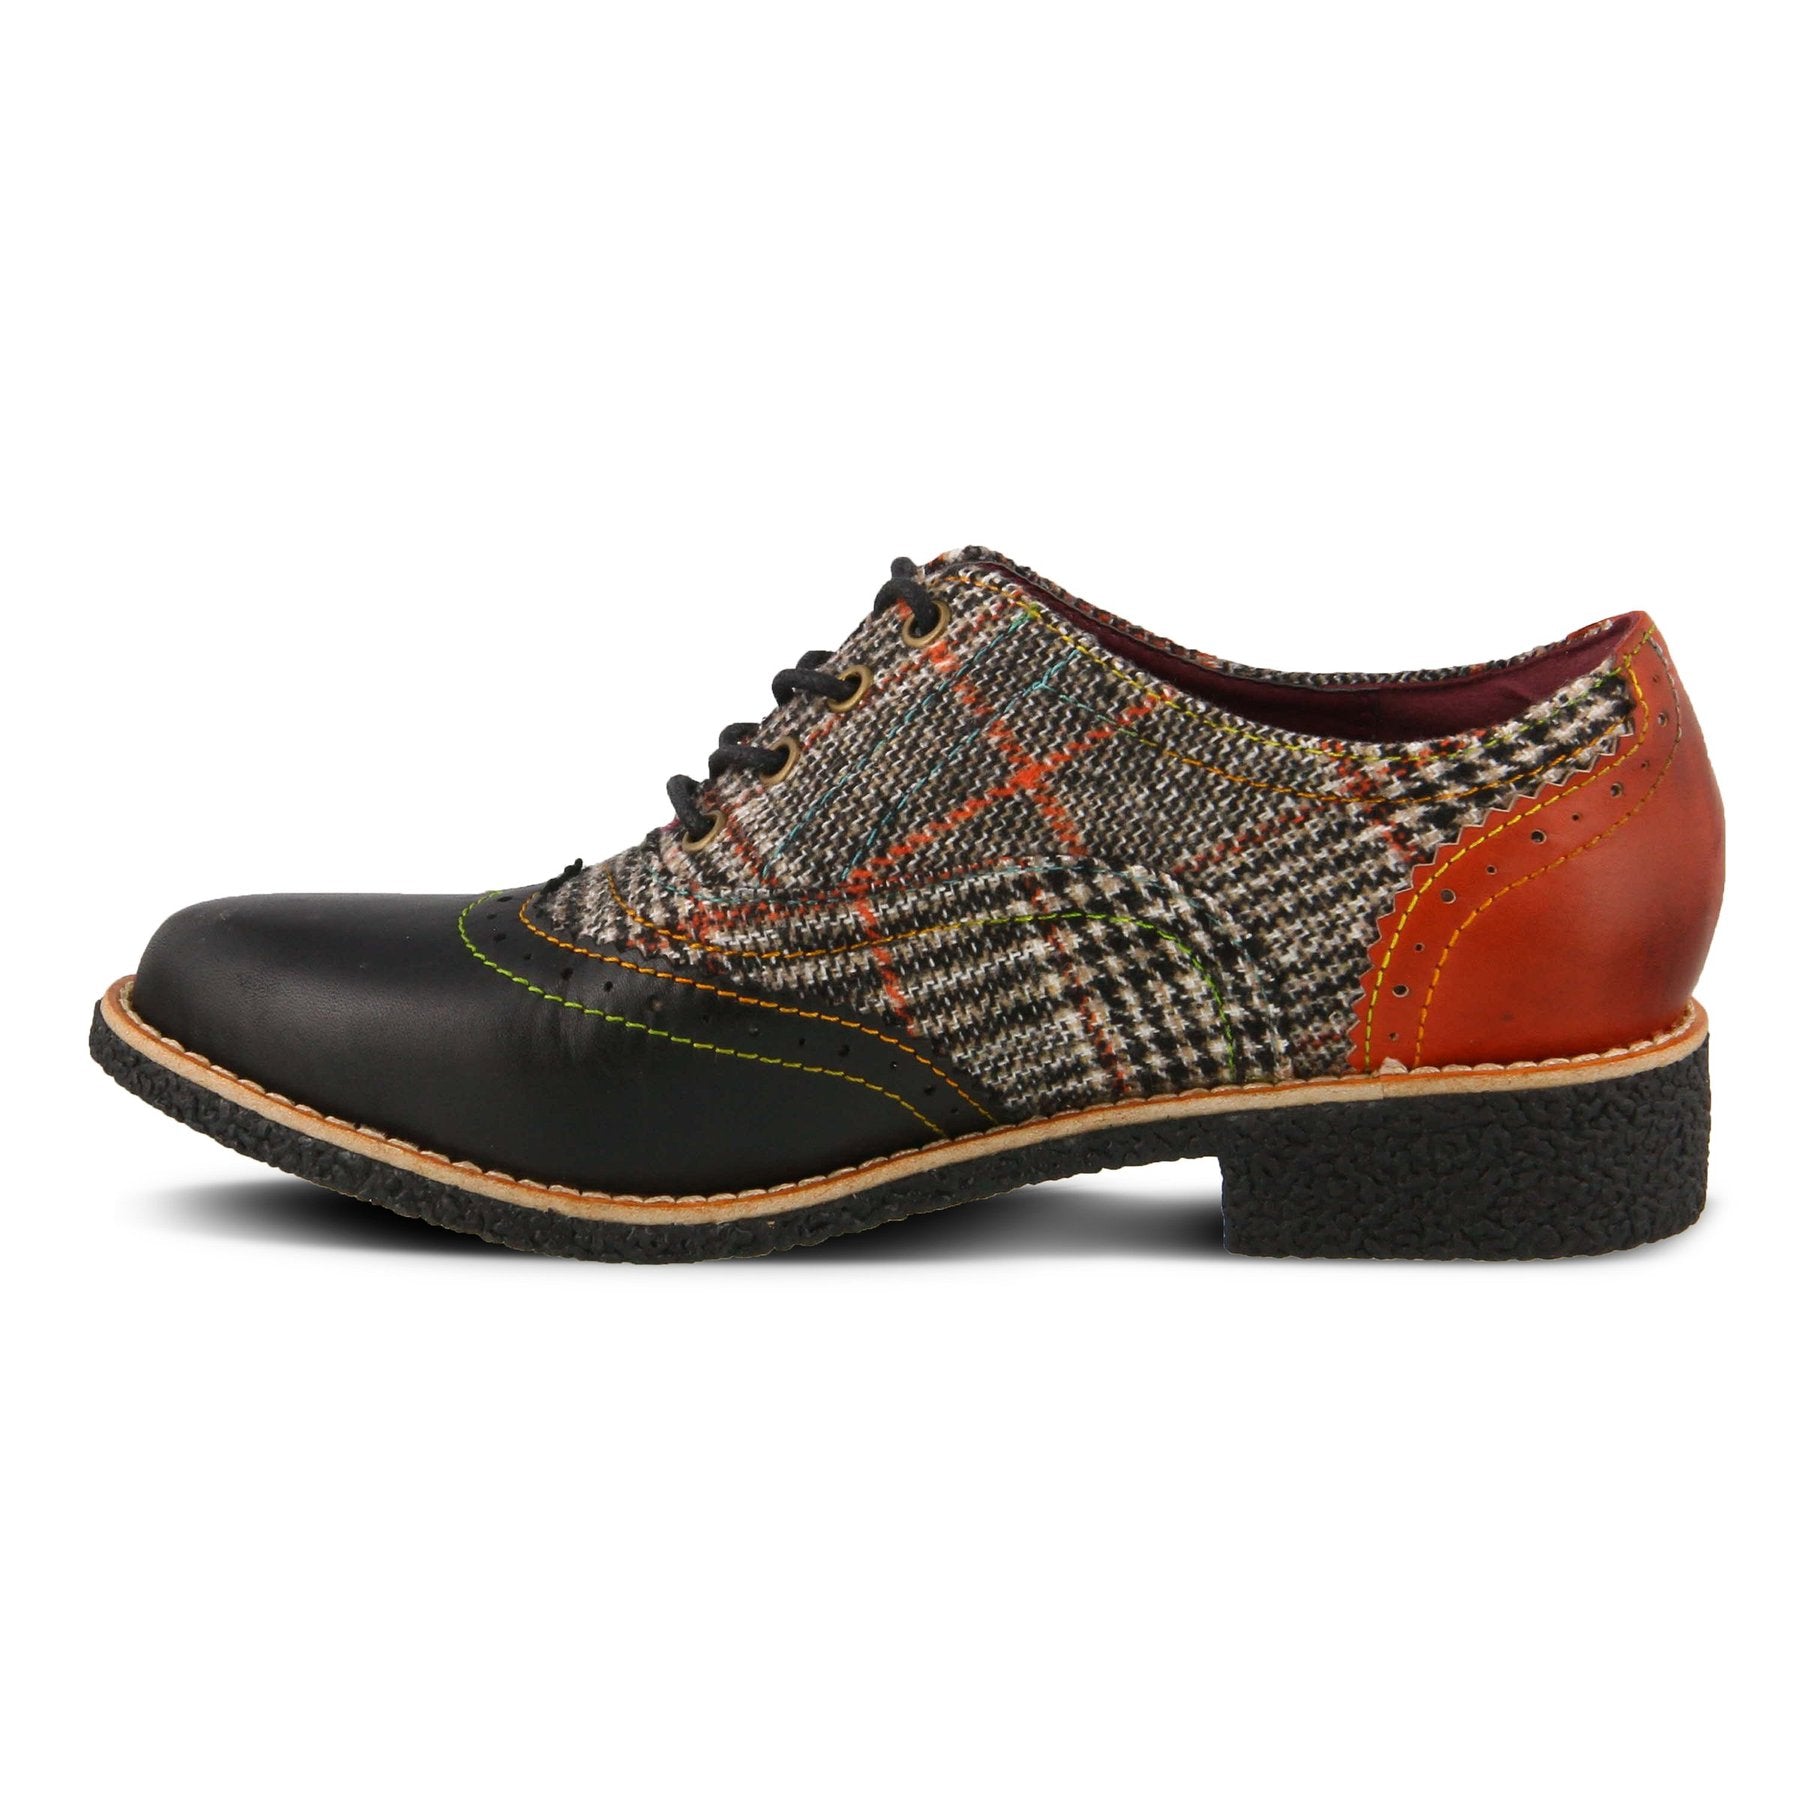 Inner side view of the l'artiste muggiasti shoe. This oxford shoe has a lace up front, red leather on the heel, black leather over the toes, and a mix of red and black plaid fabric in between.